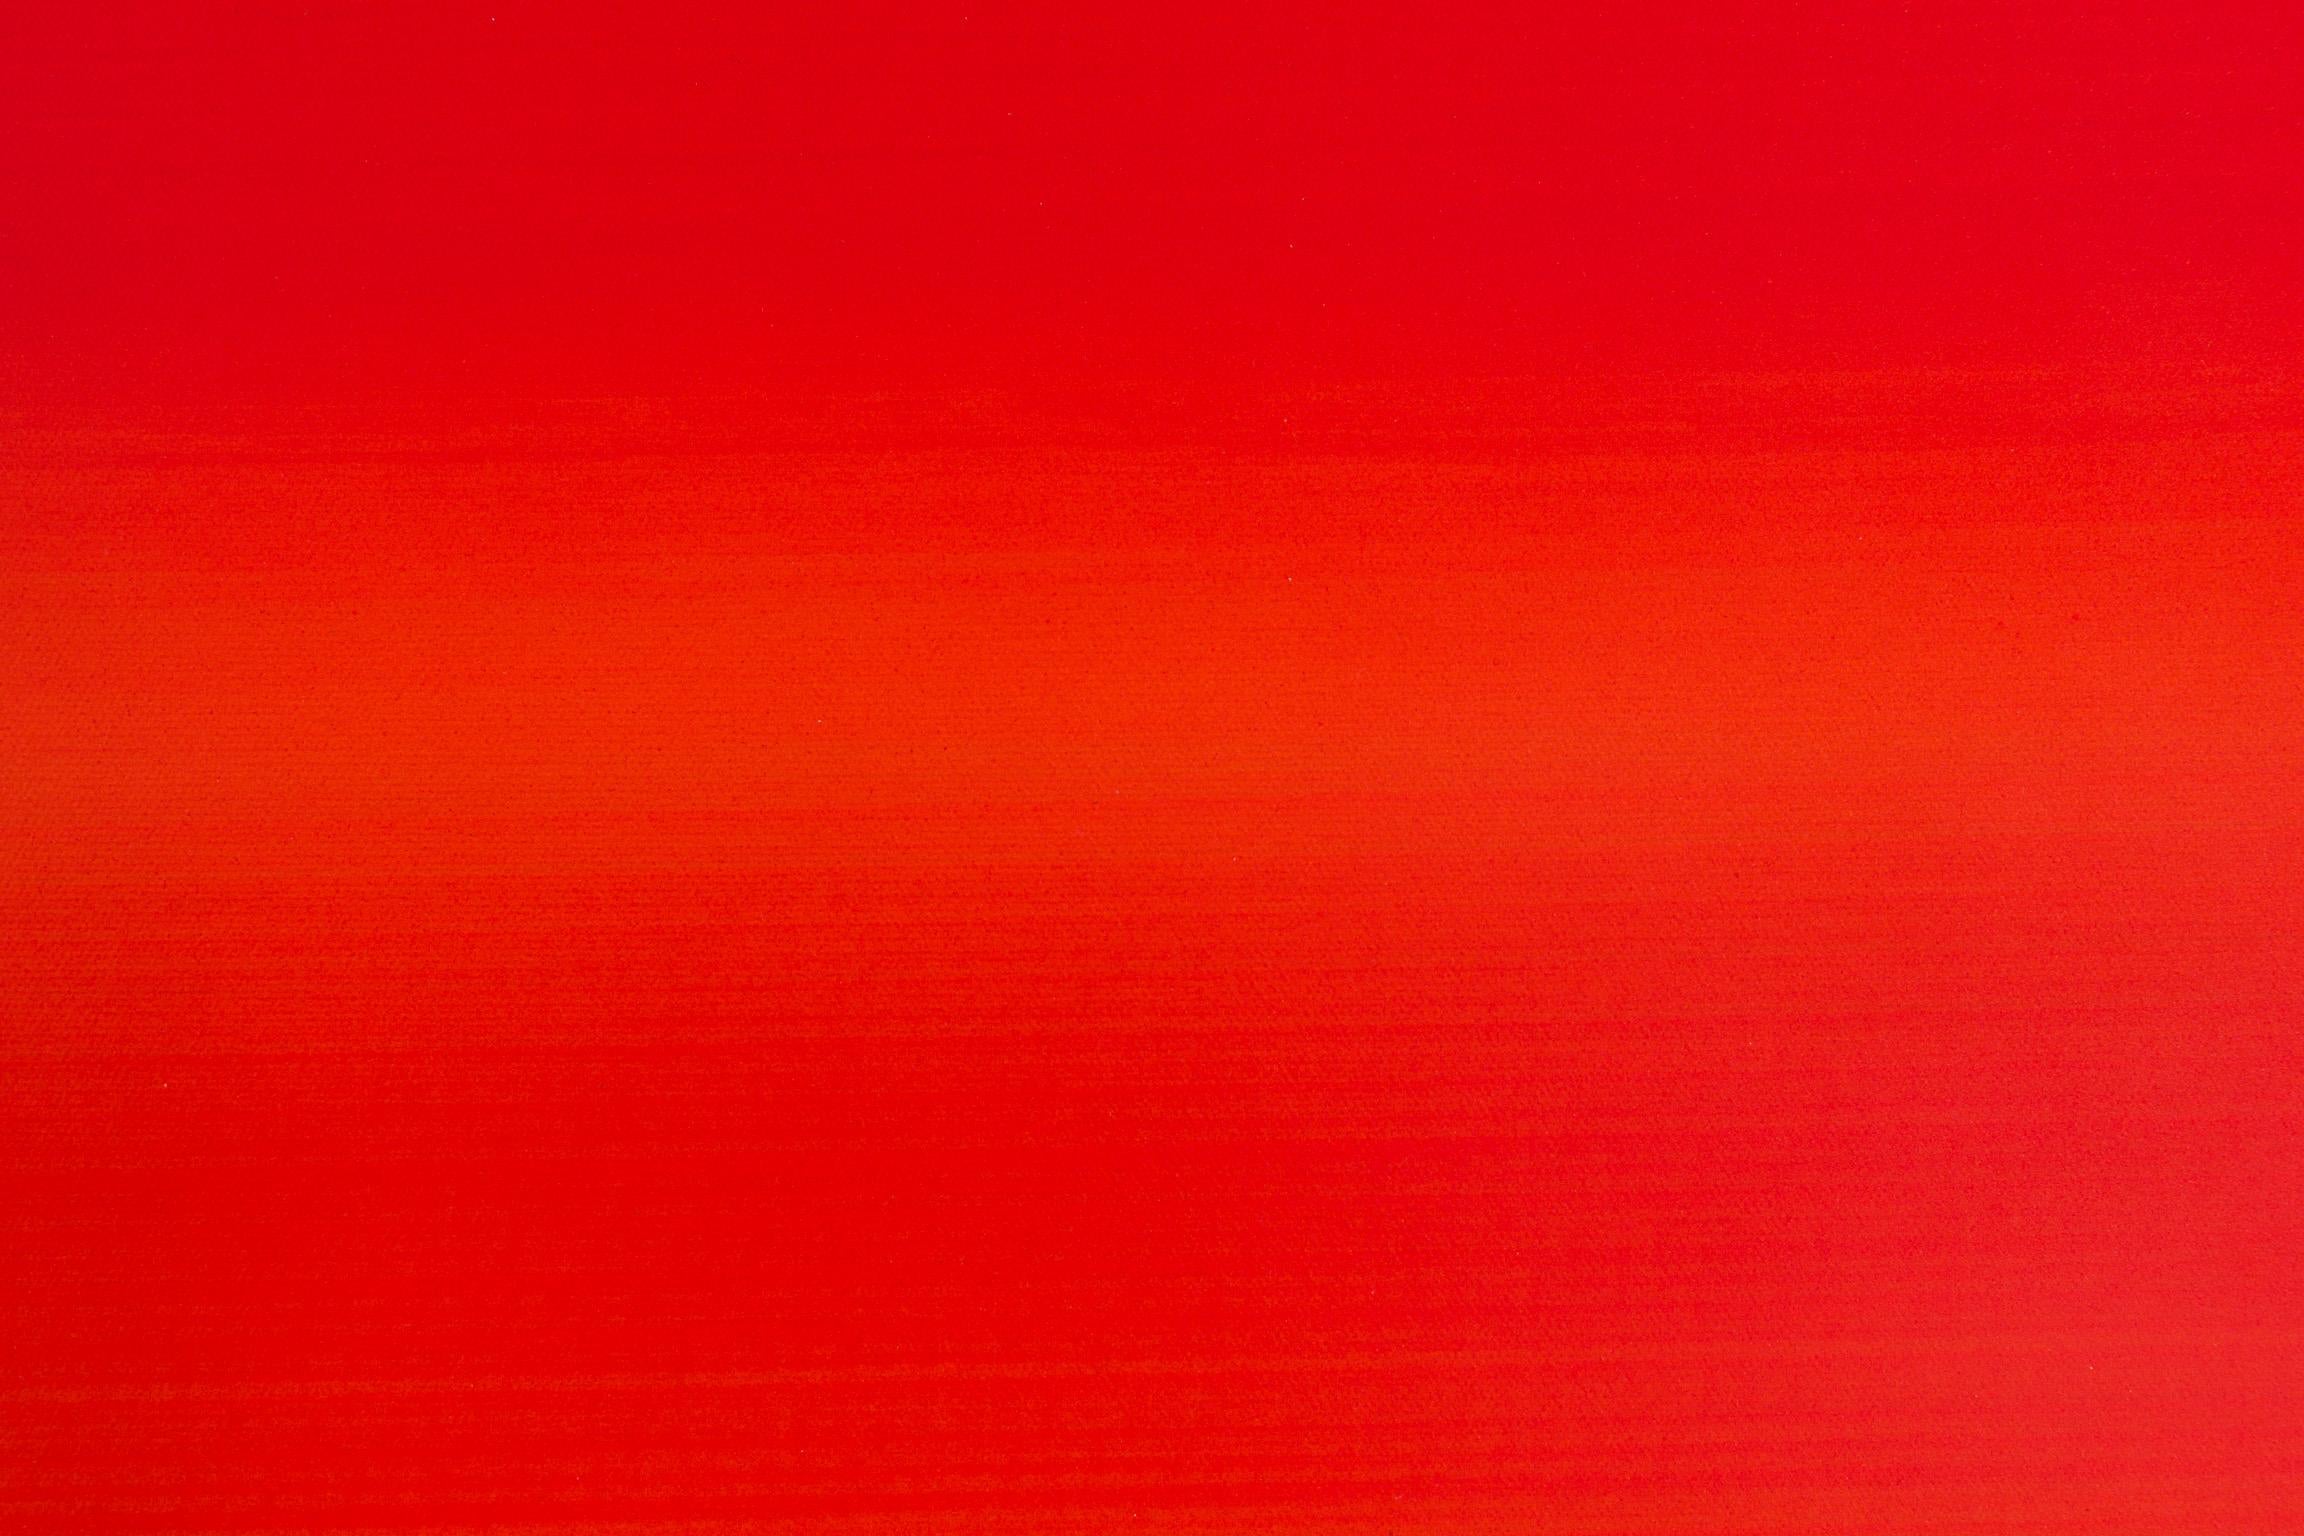 Red Fuzzy Logic - Abstract Painting by Tom Bolles